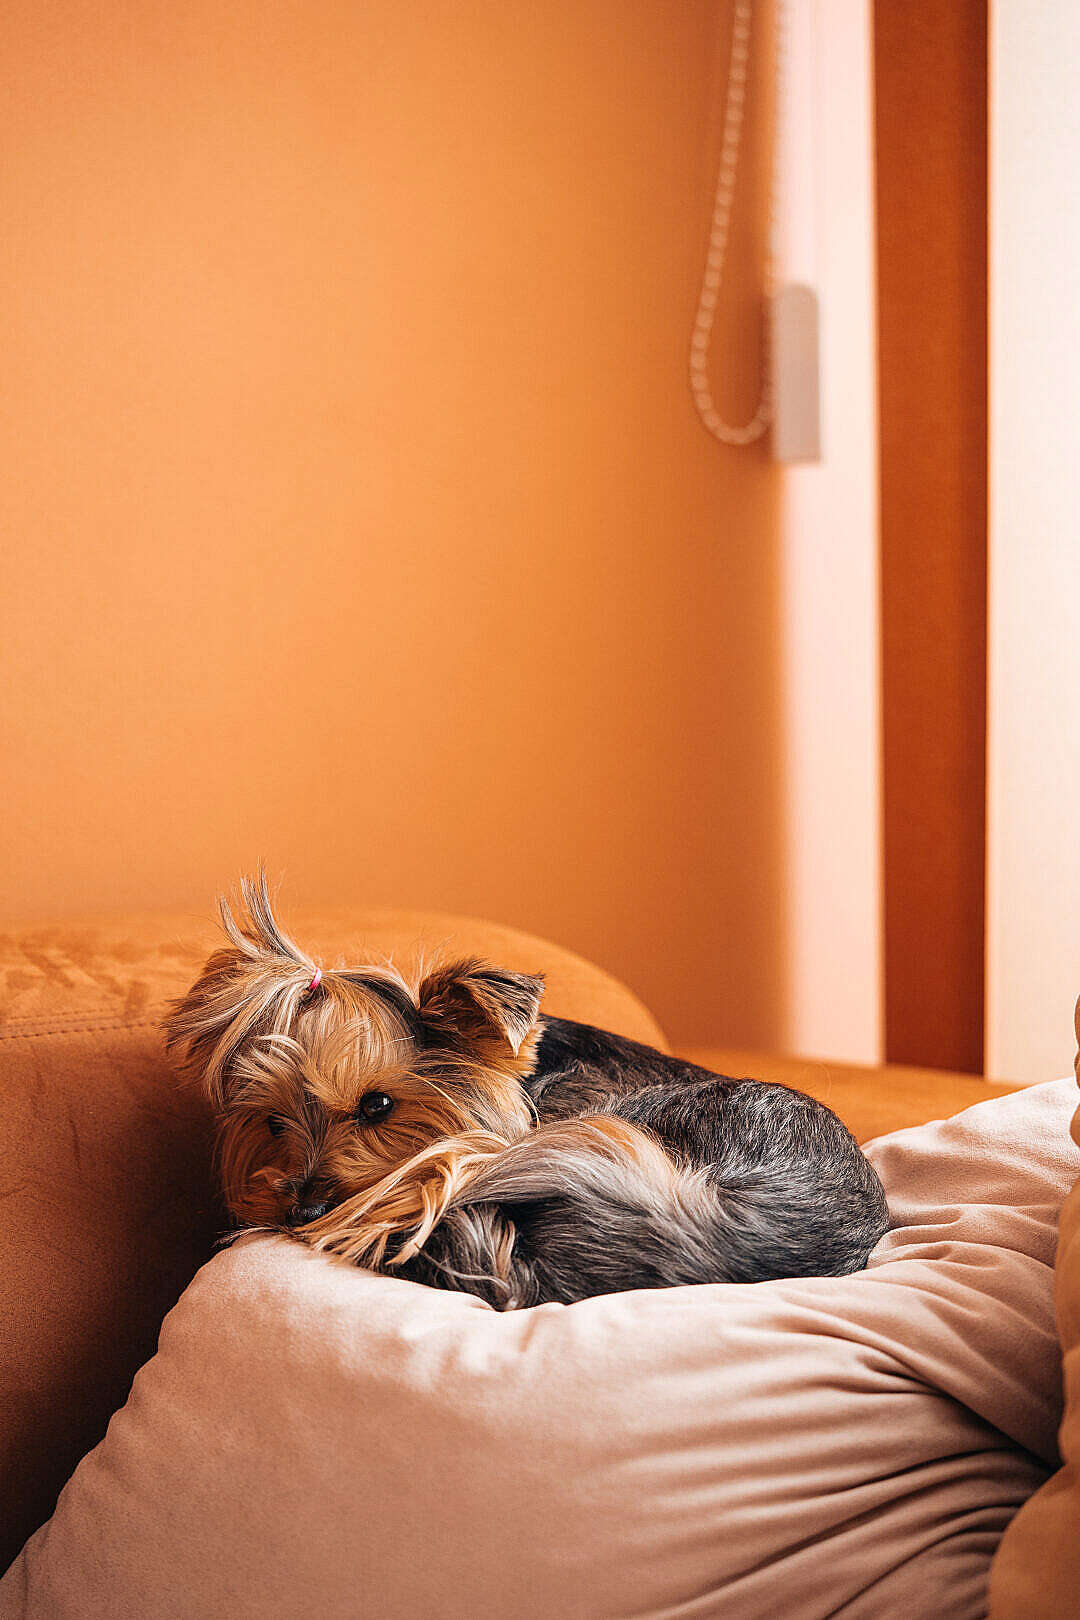 Download Cute Dog Jessie Relaxing on a Pillow FREE Stock Photo